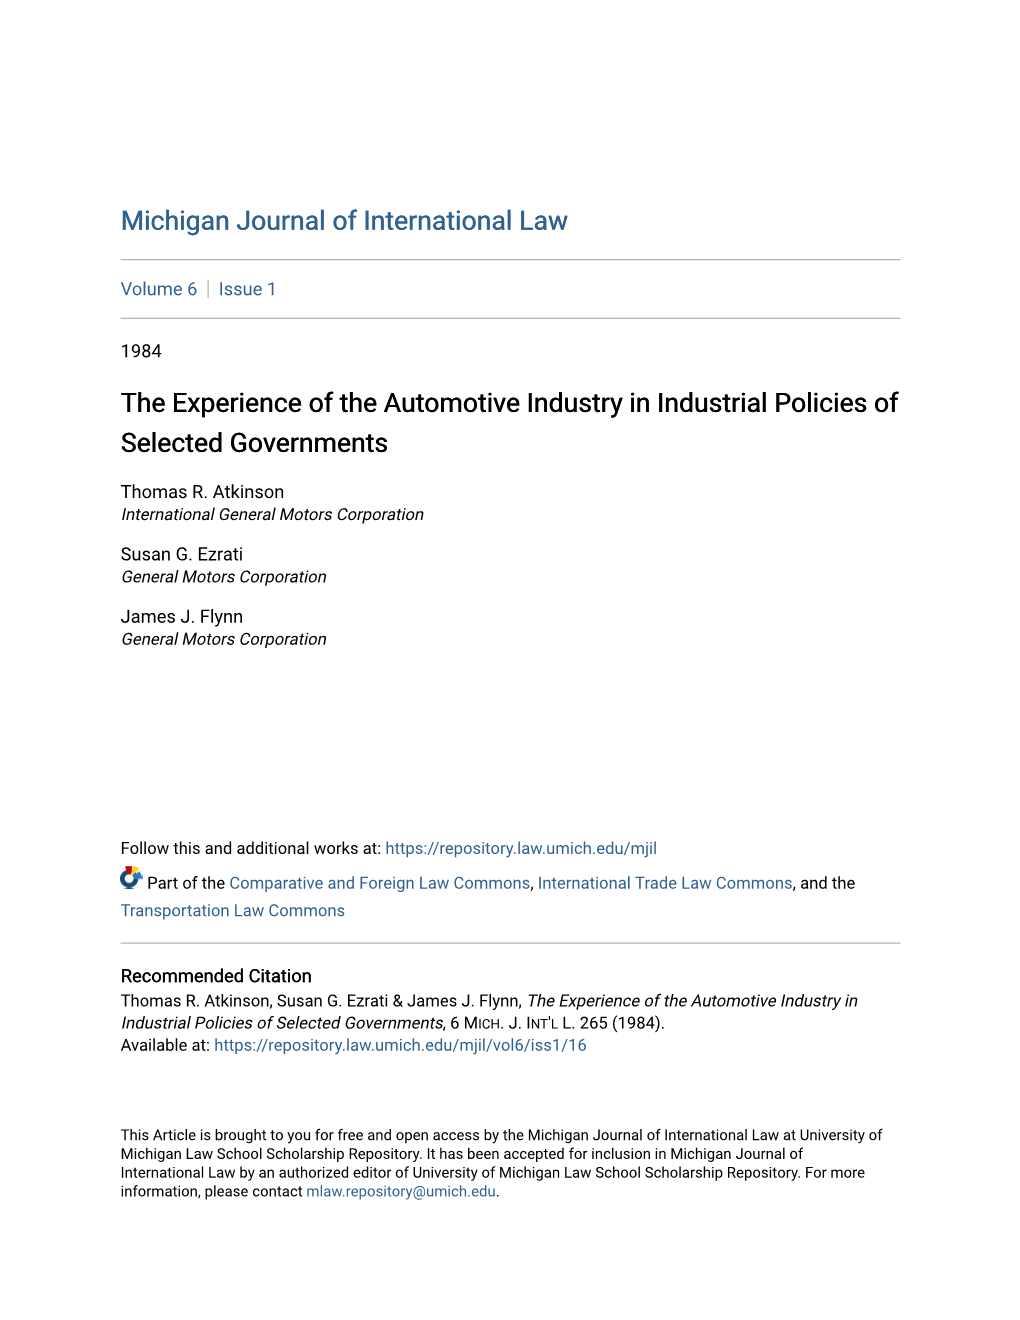 The Experience of the Automotive Industry in Industrial Policies of Selected Governments